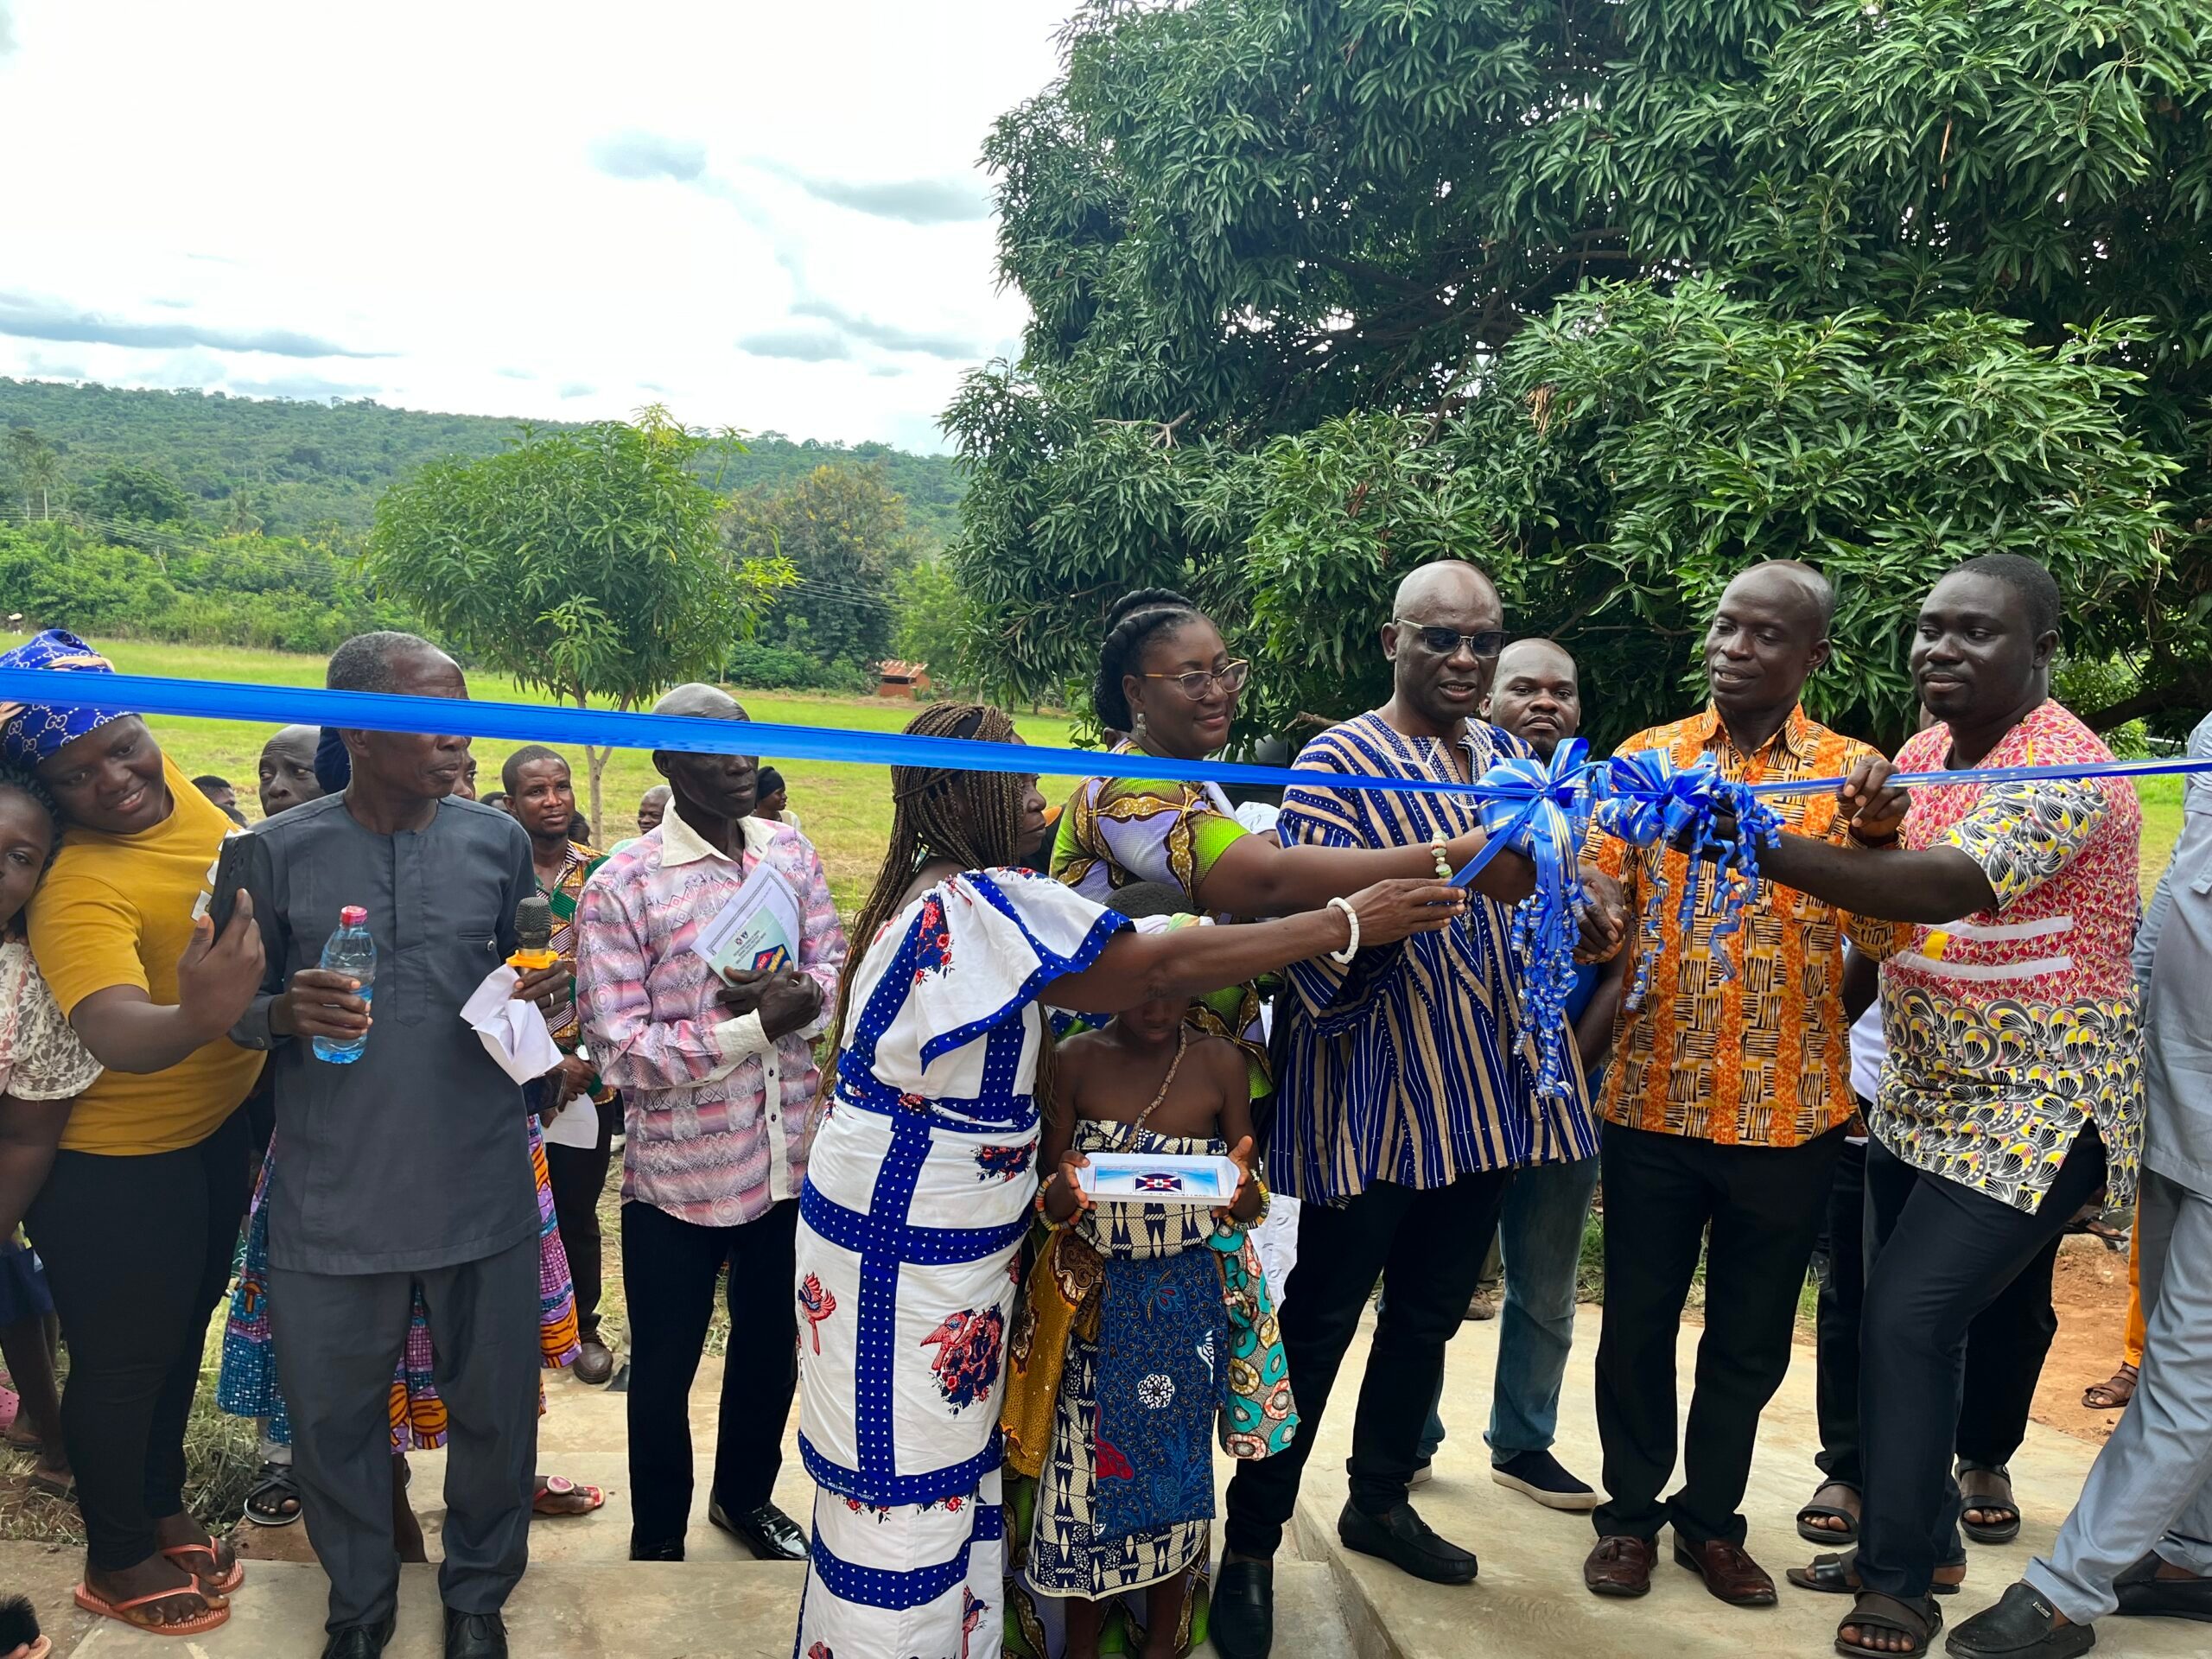 A ribbon being cut at the opening of the teachers' accomodation